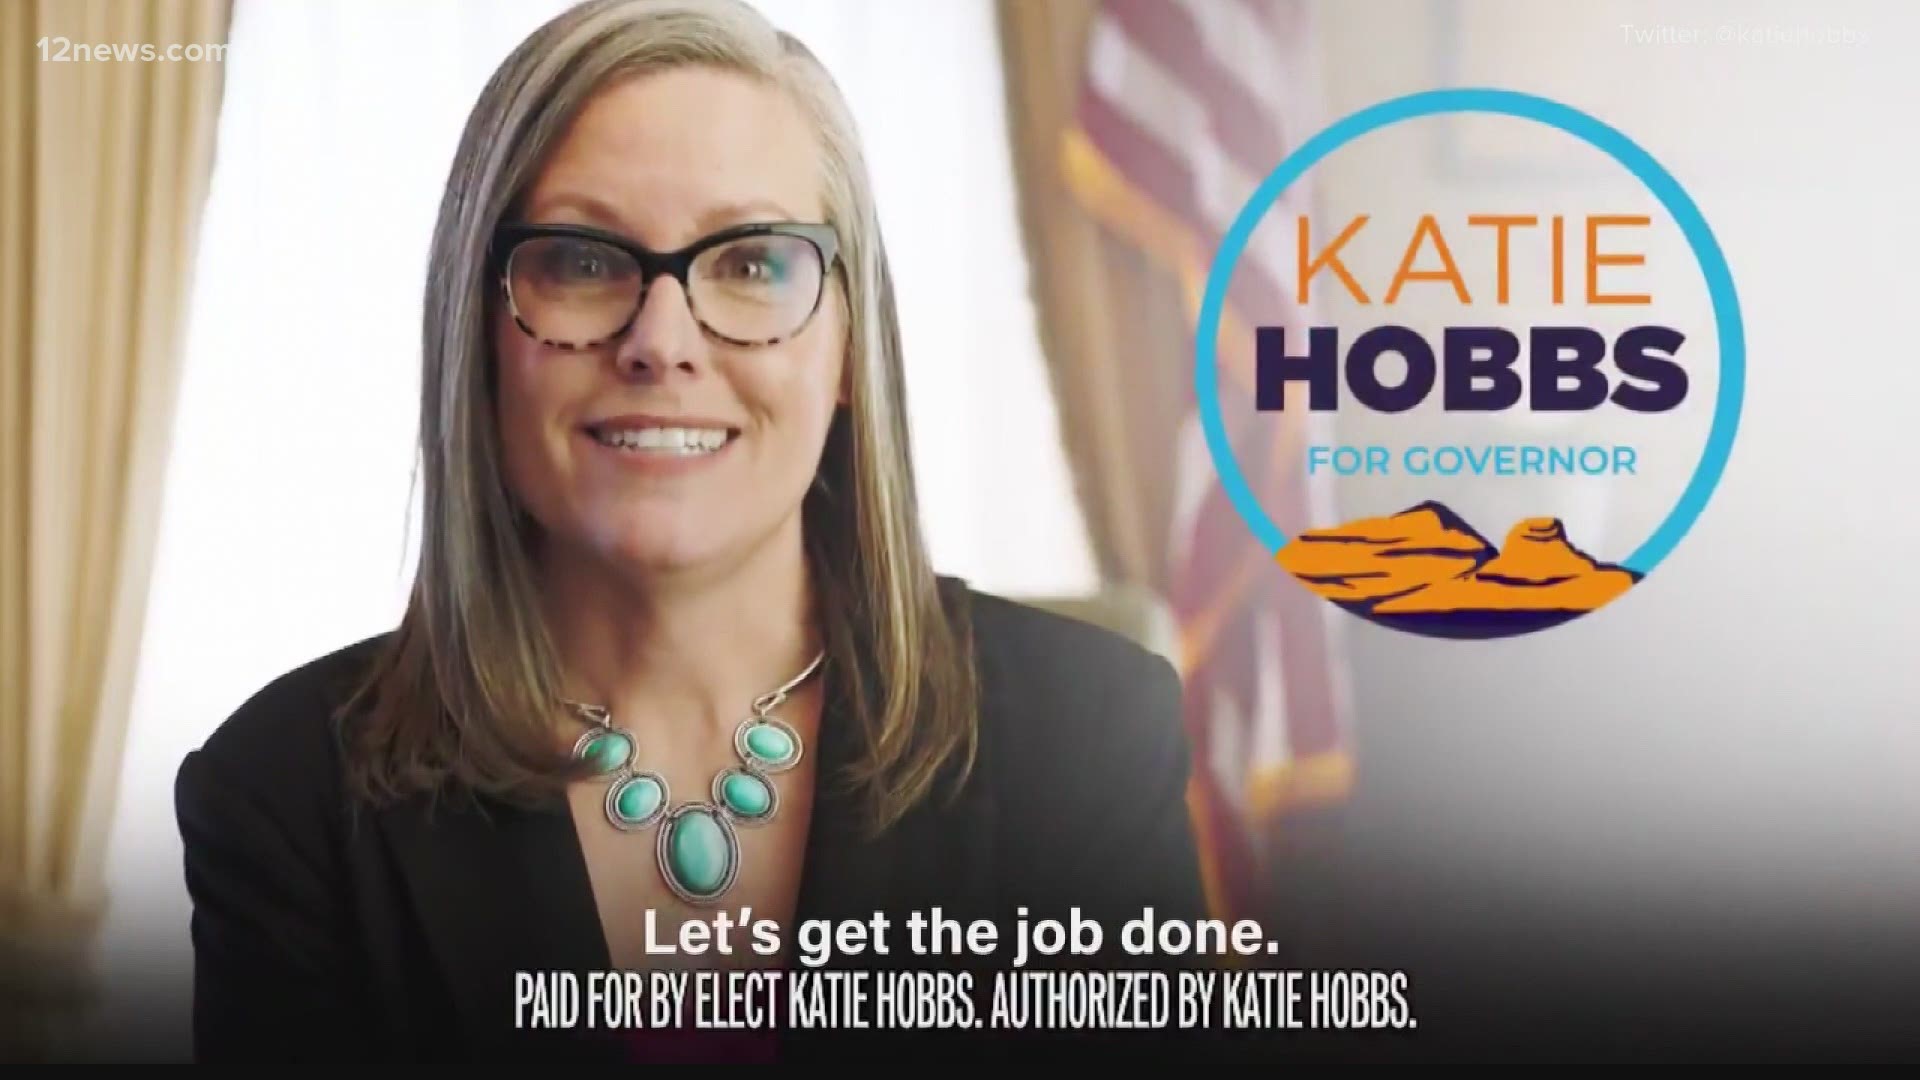 Multiple people on both sides of the aisle have announced their candidacy for Arizona's governor election in 2022. Katie Hobbs (D) is the latest name on the list.